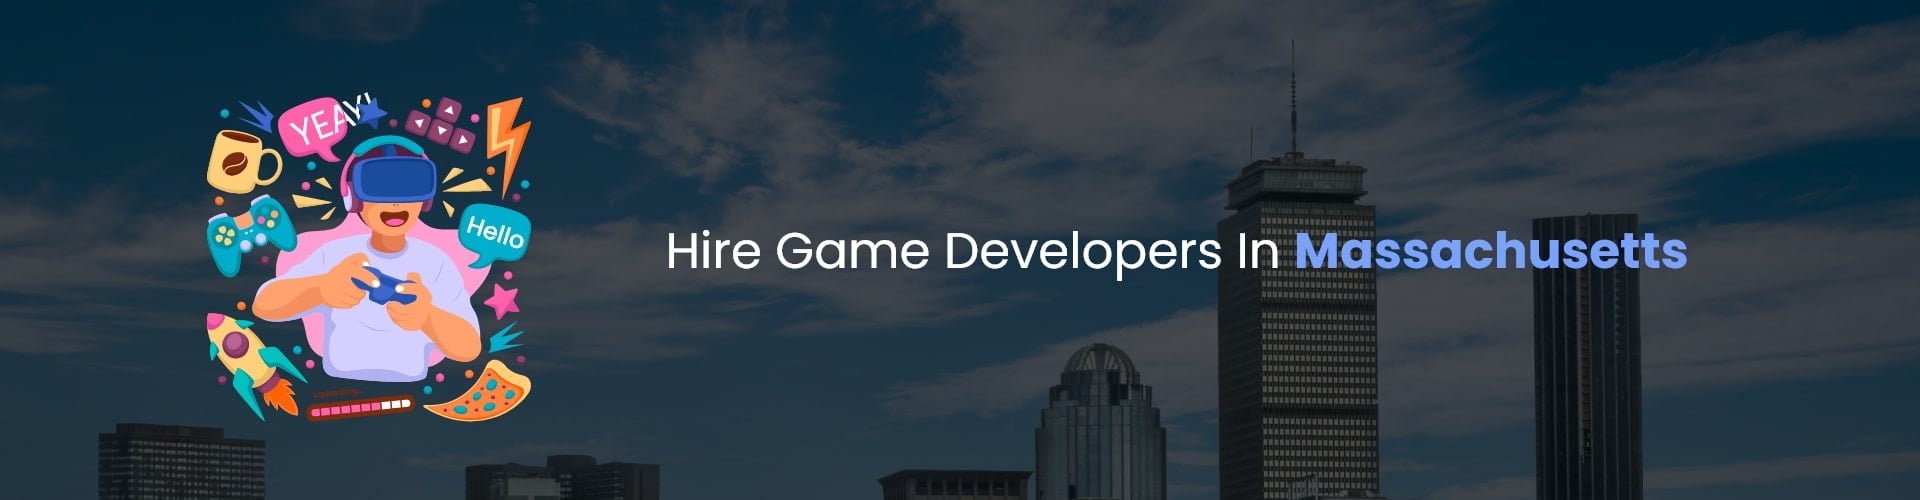 hire game developers in massachusetts